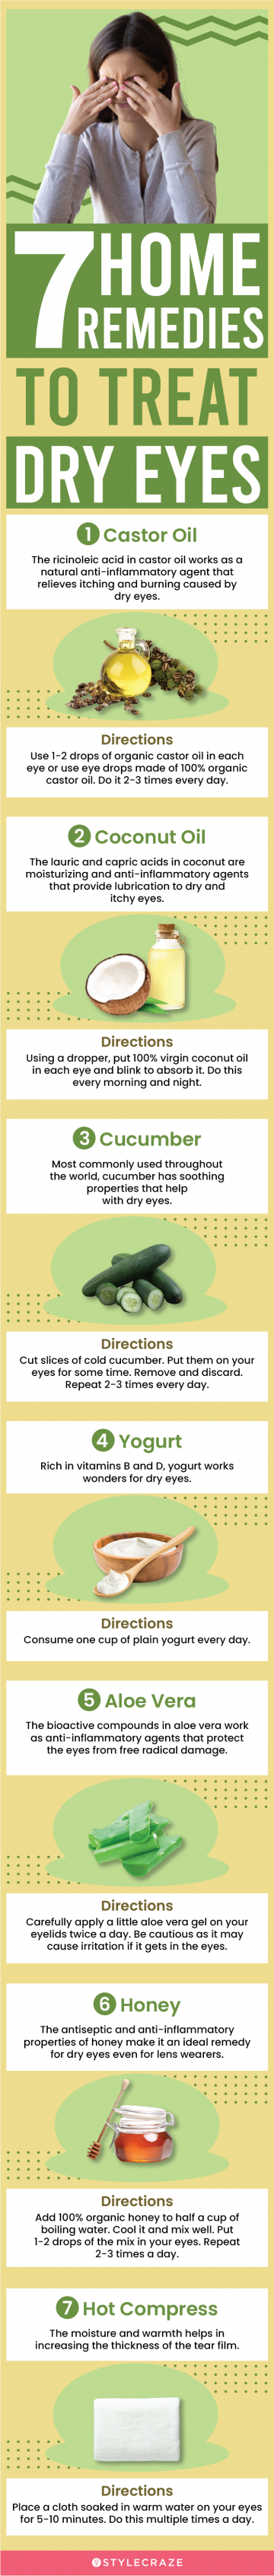 7 home remedies to treat dry eyes (infographic)